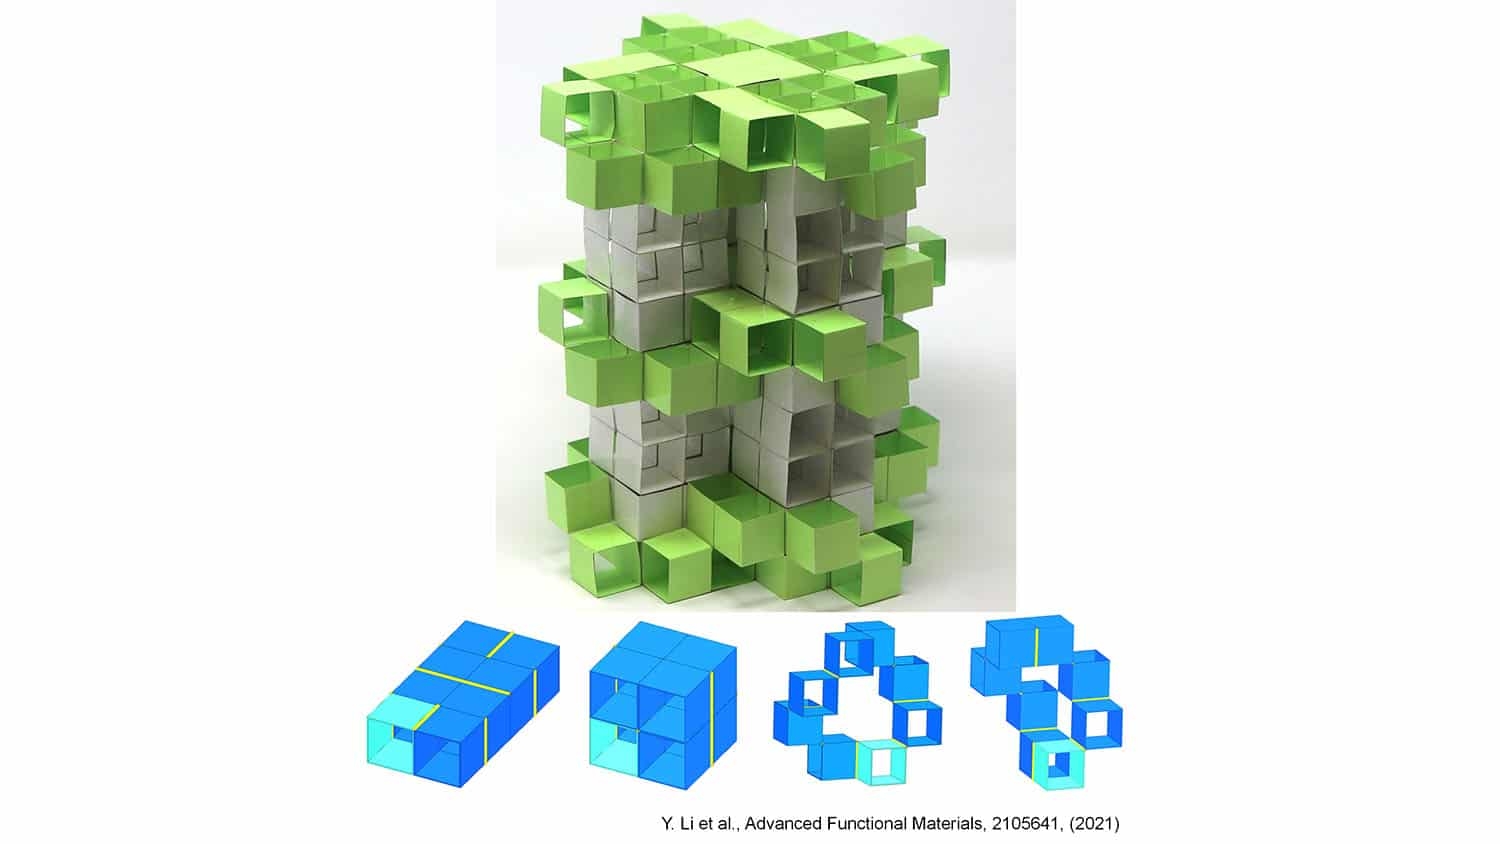 various shapes of metamaterial building blocks lie in front of a much larger structure made from similar blocks